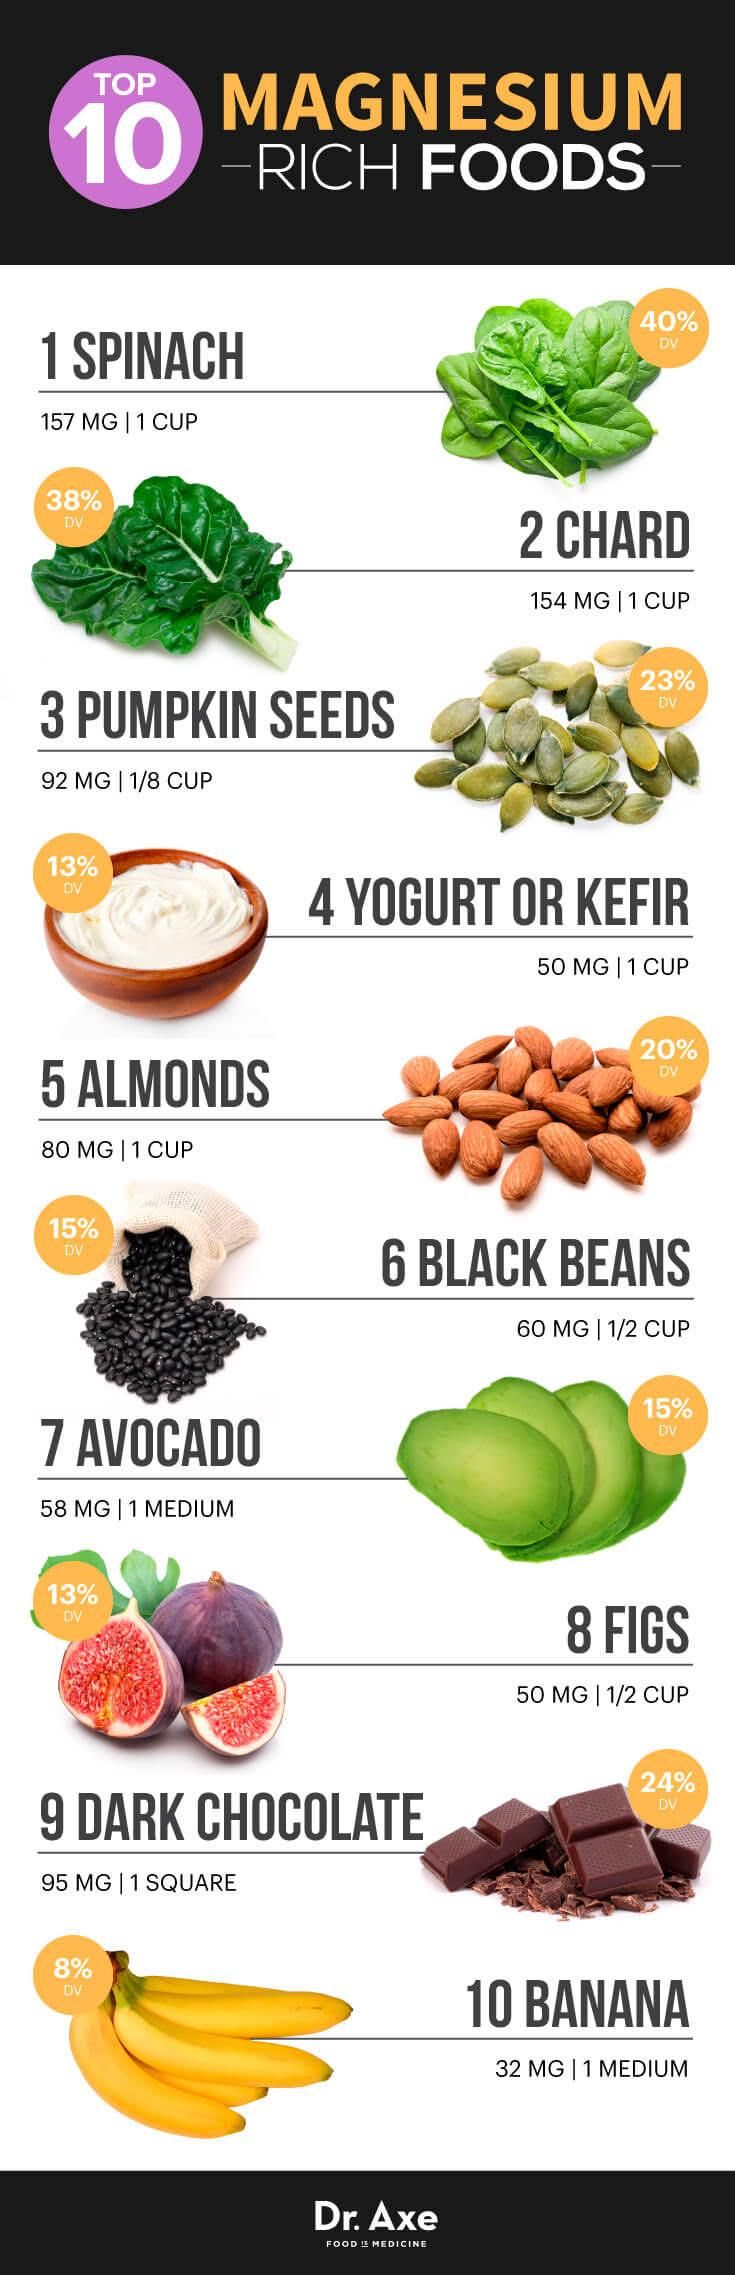 Top 10 Magnesium Rich Foods For Your Diet Infographic